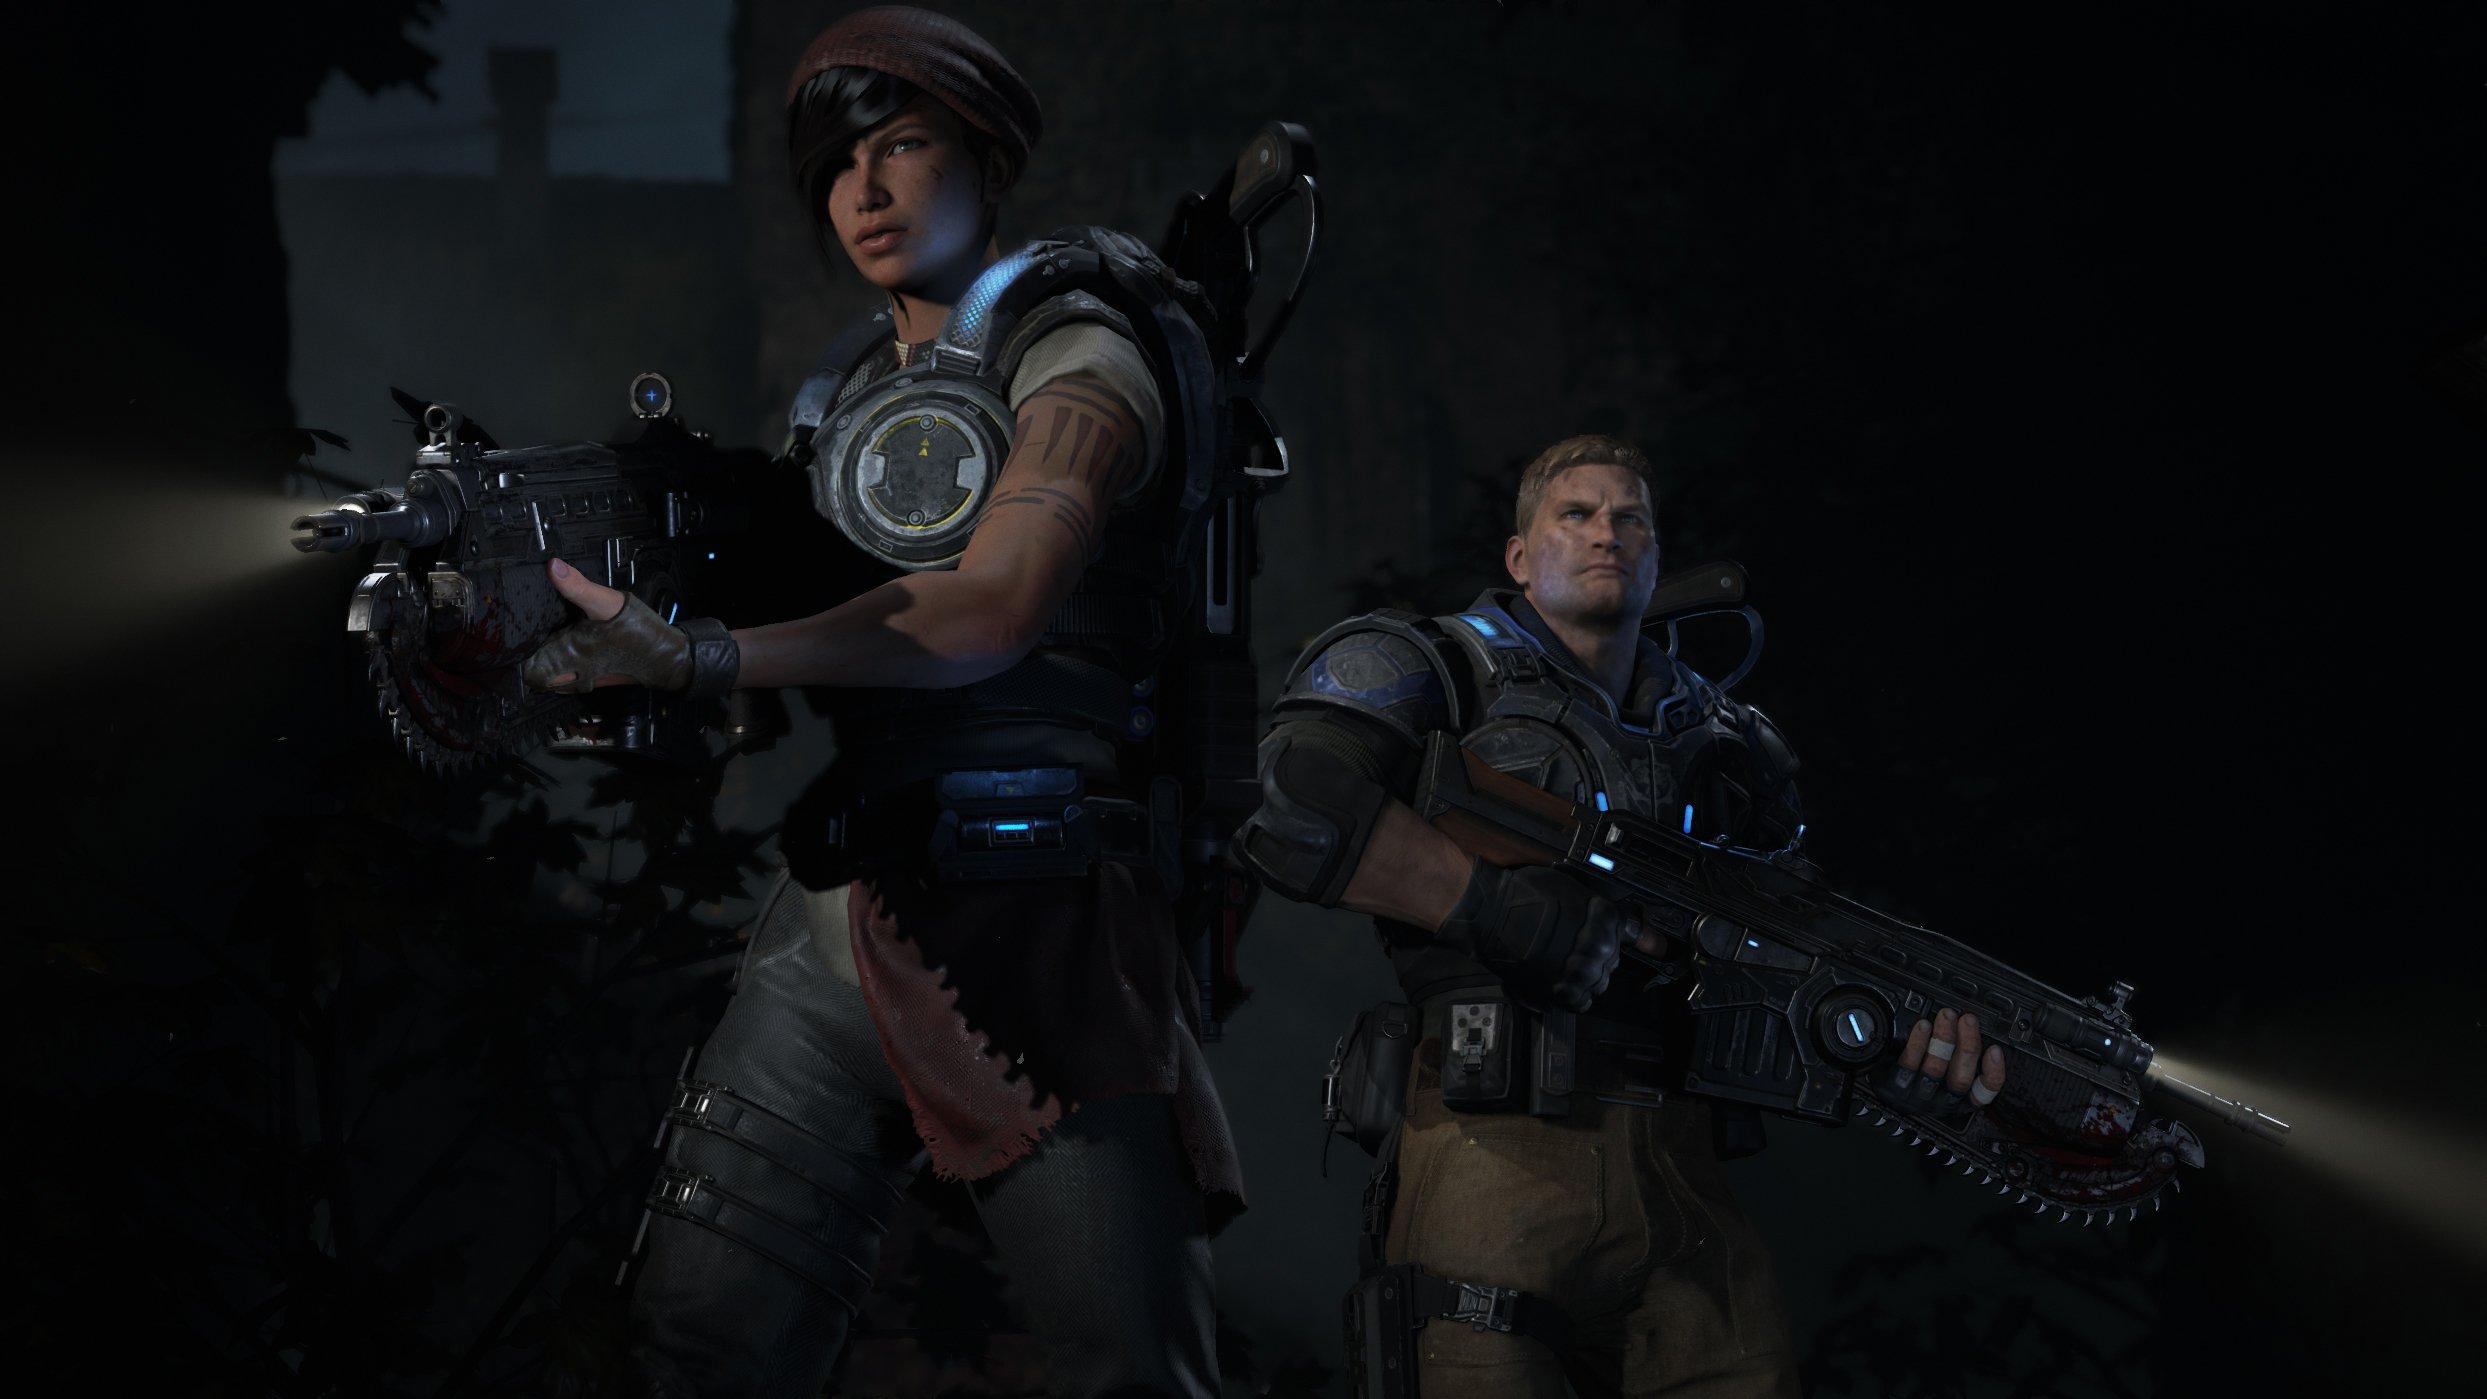 Gears of War 4, Xbox One & PC Co-Op Campaign